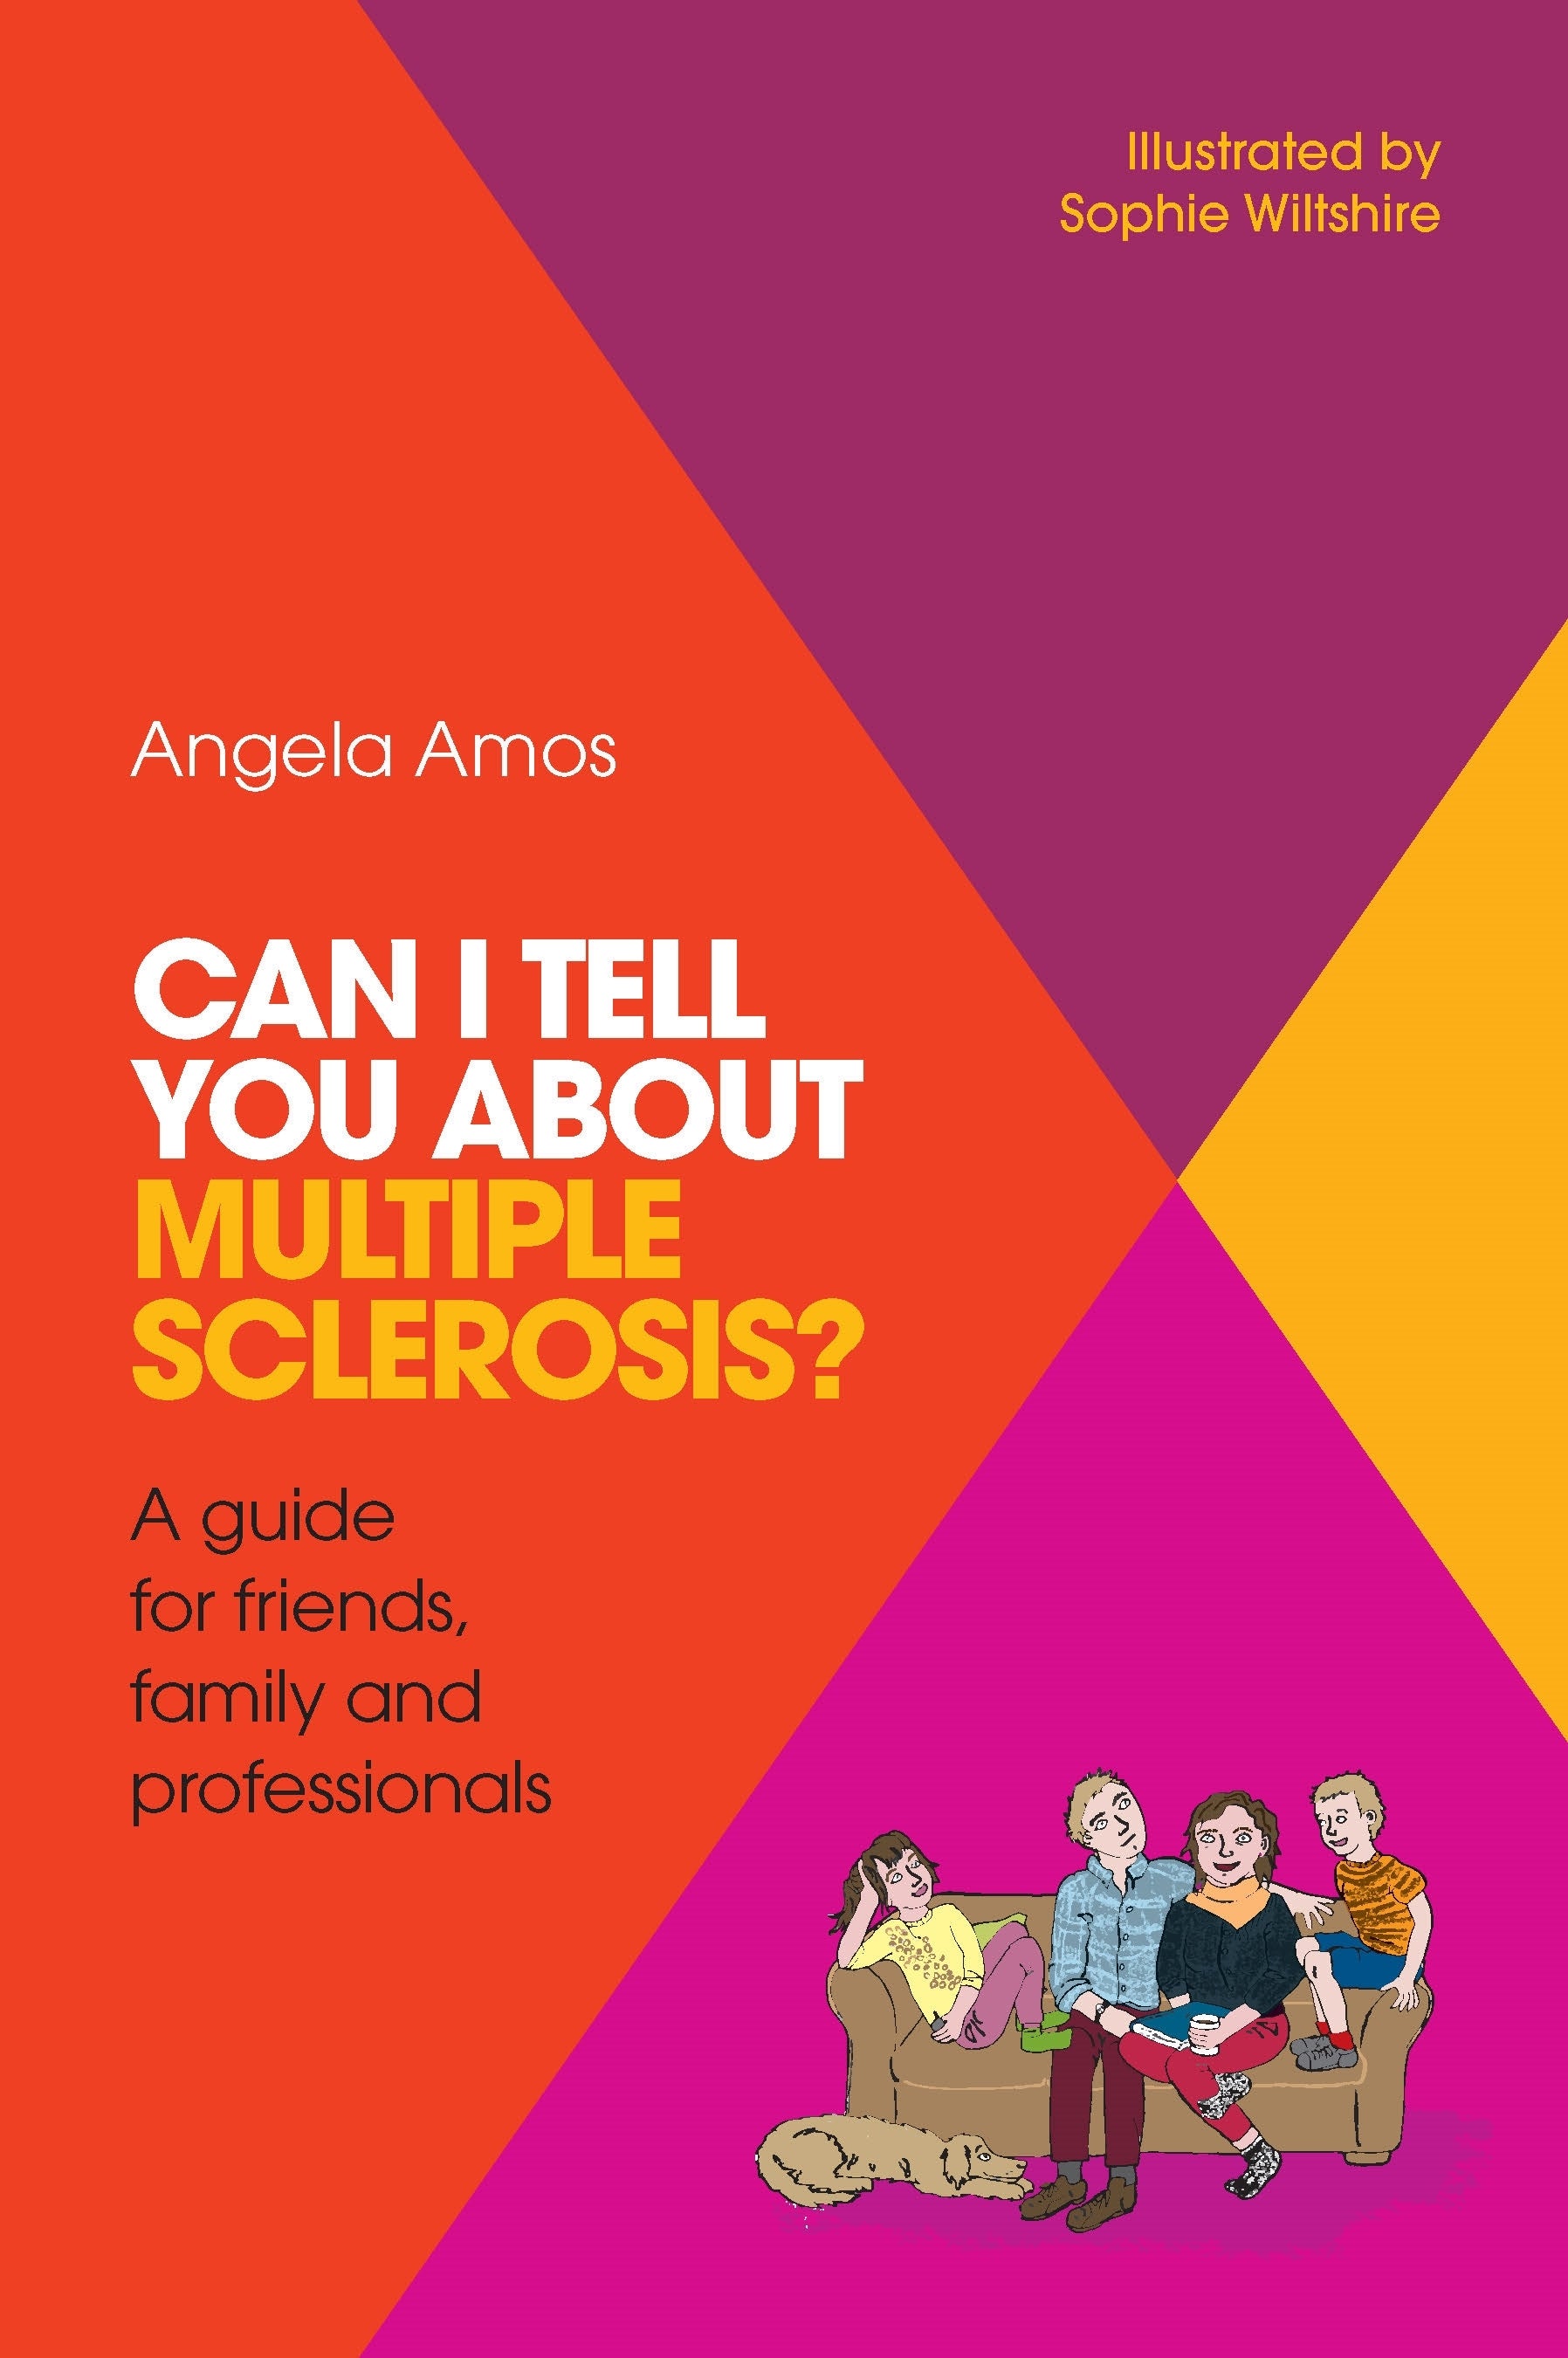 Can I tell you about Multiple Sclerosis? by Angela Amos, Sophie Wiltshire